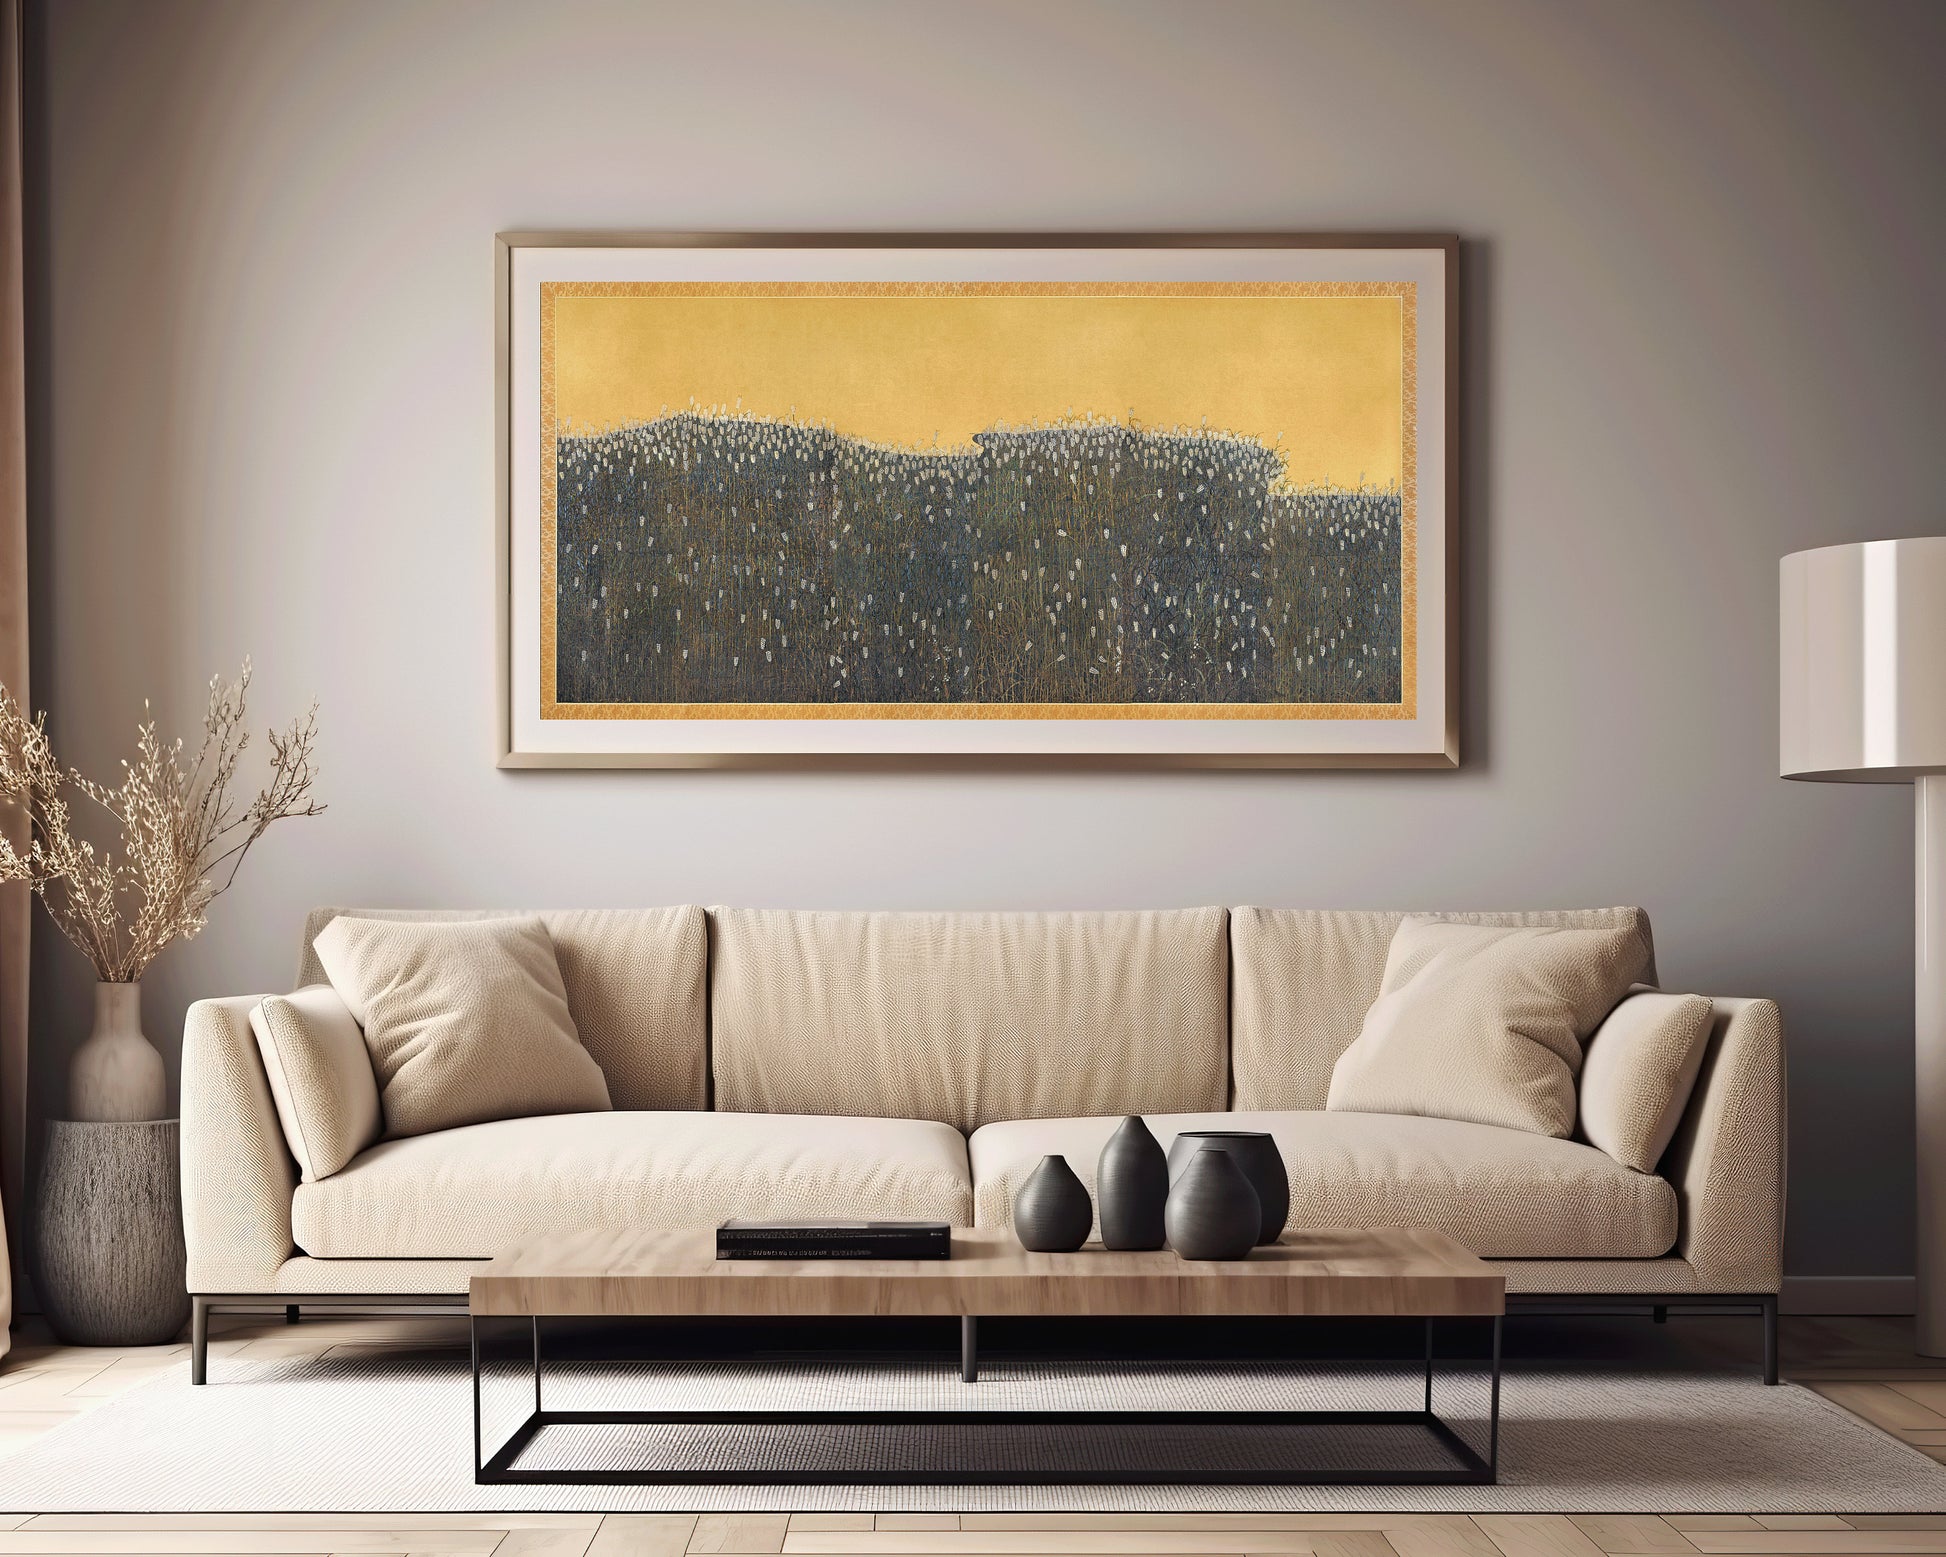 Barley Field - Vintage 17th Century European Art by Anonymous | Classic Wide Panoramic Art (available framed or unframed)